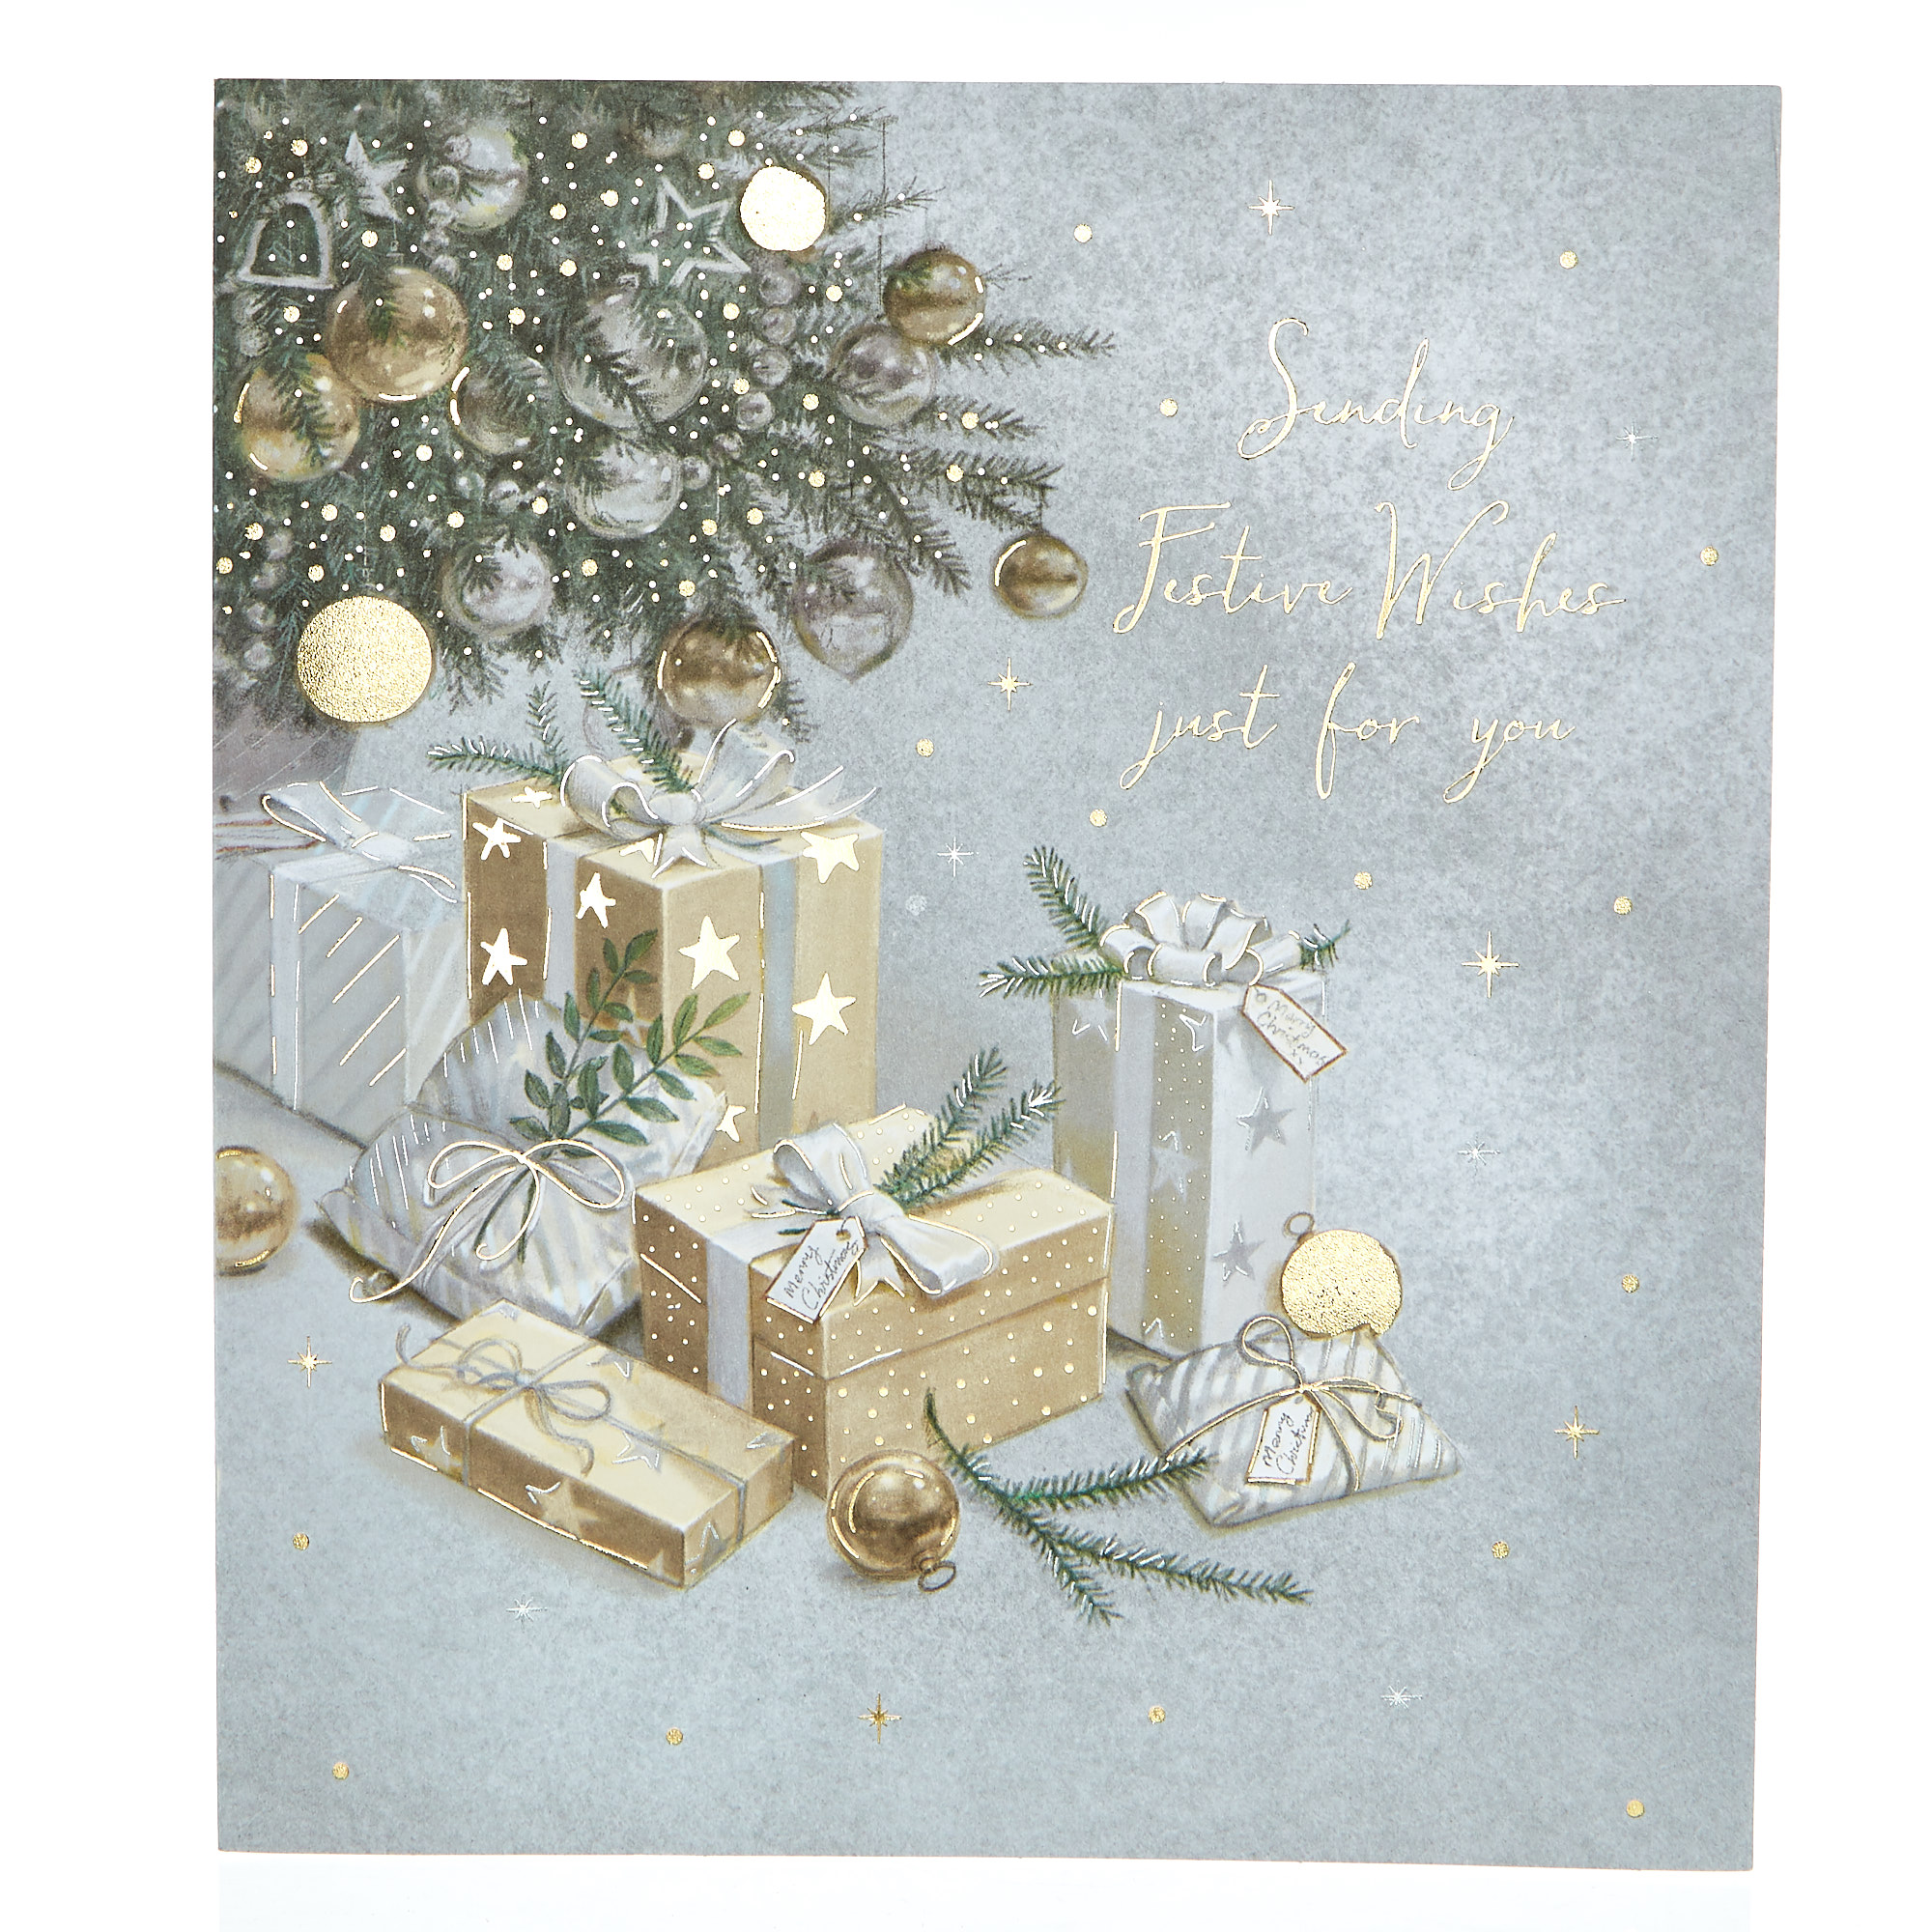 Buy Box of 12 Deluxe Tree Charity Christmas Cards - 2 Designs for GBP 3.99 | Card Factory UK